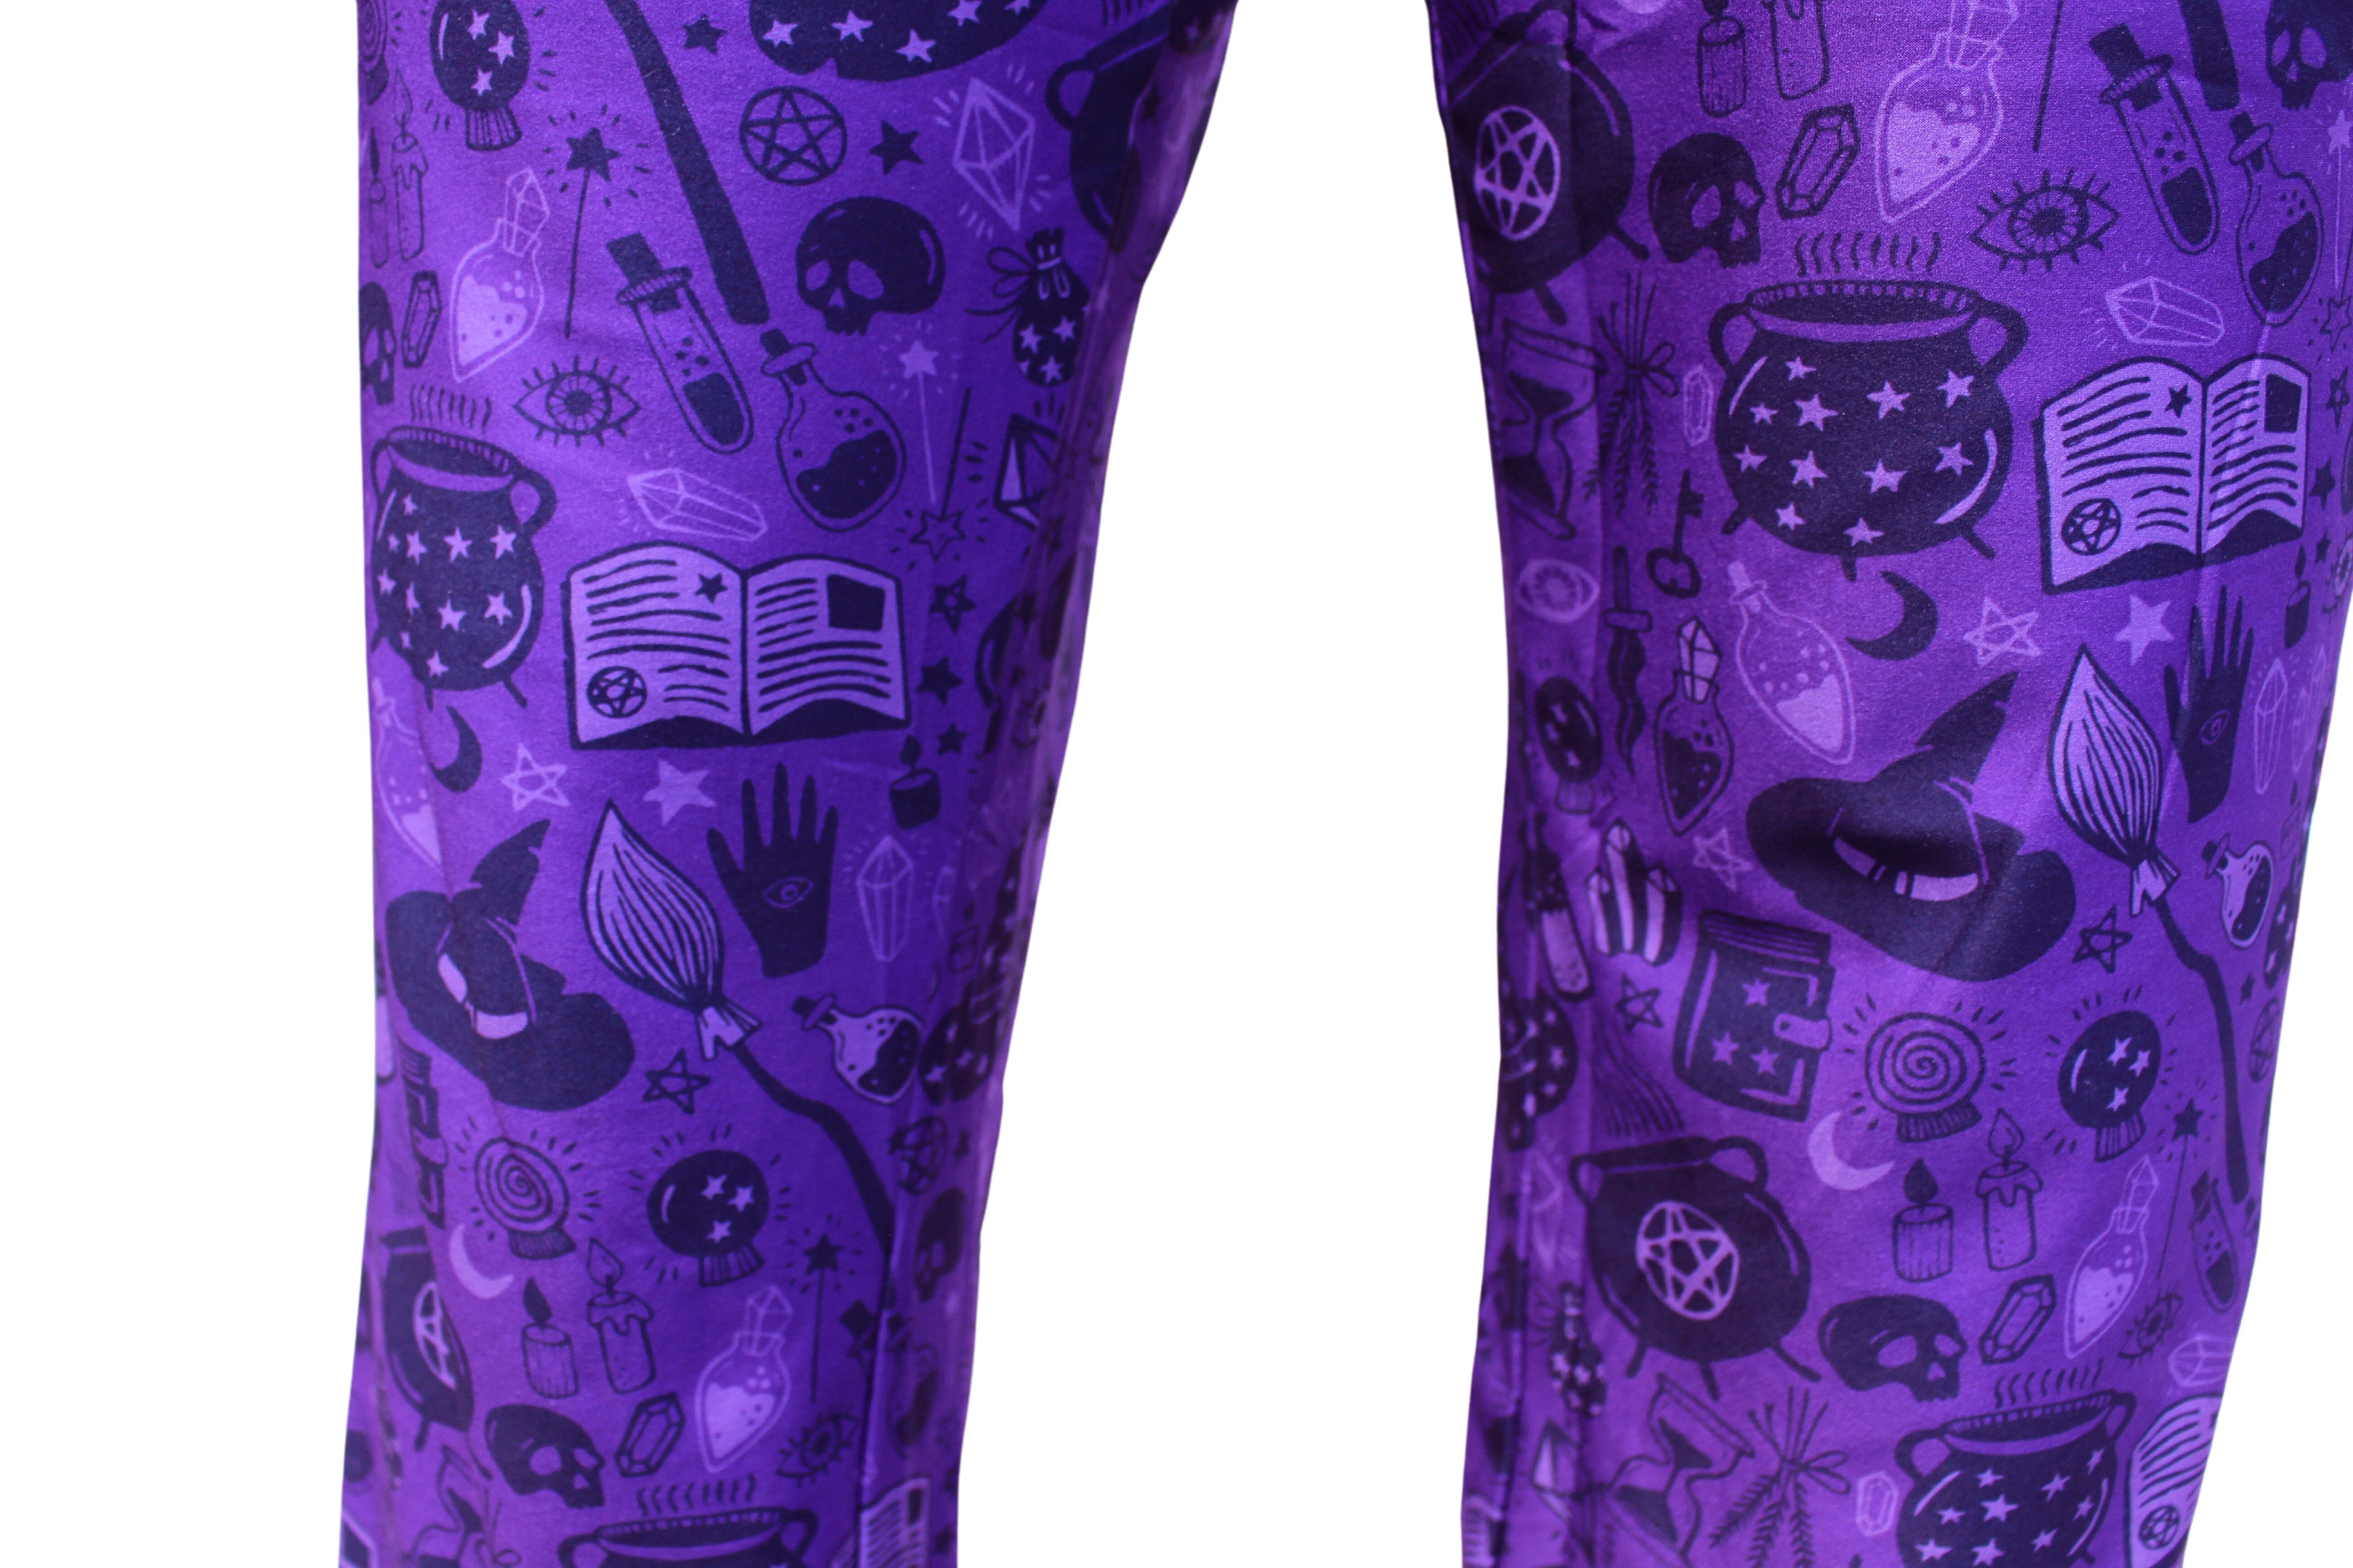 Drink Up Witches Pajama Lounge Pants close up view of pattern on legs (witch hats, brooms, potions, skull heads, stars, candles, diamonds, spell books, eyes)